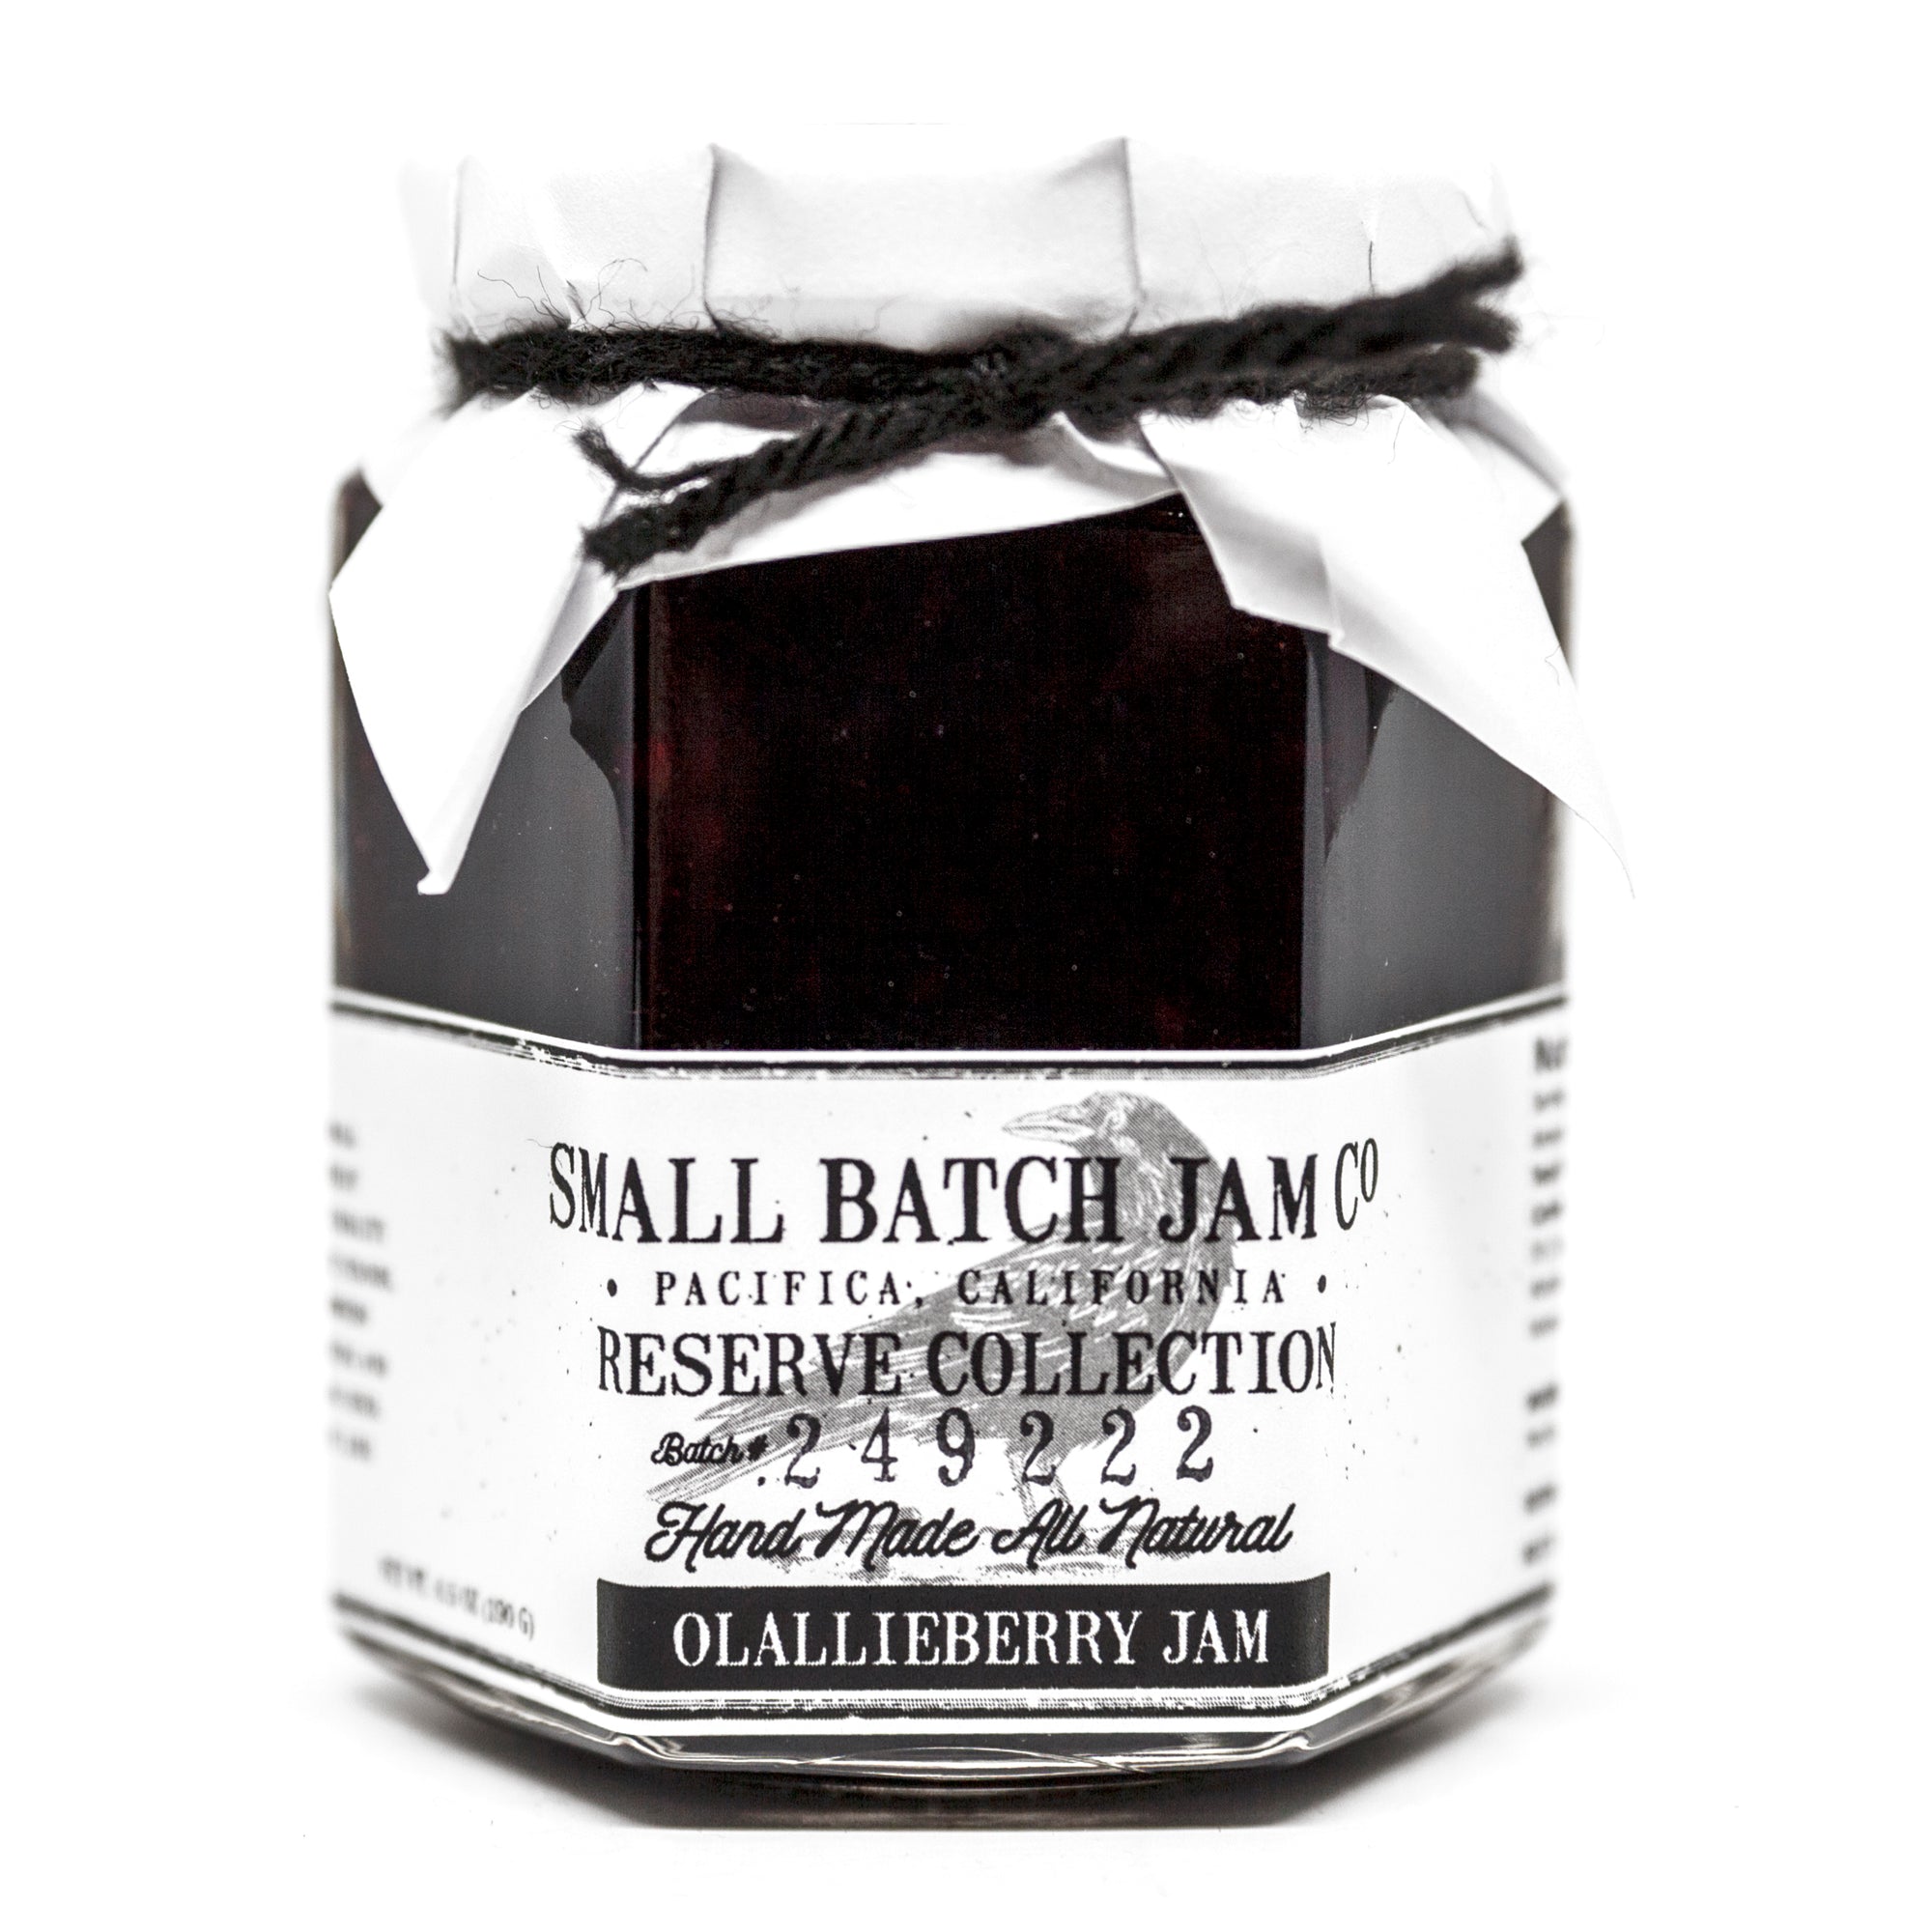 Olallieberry Jam - Reserve Collection